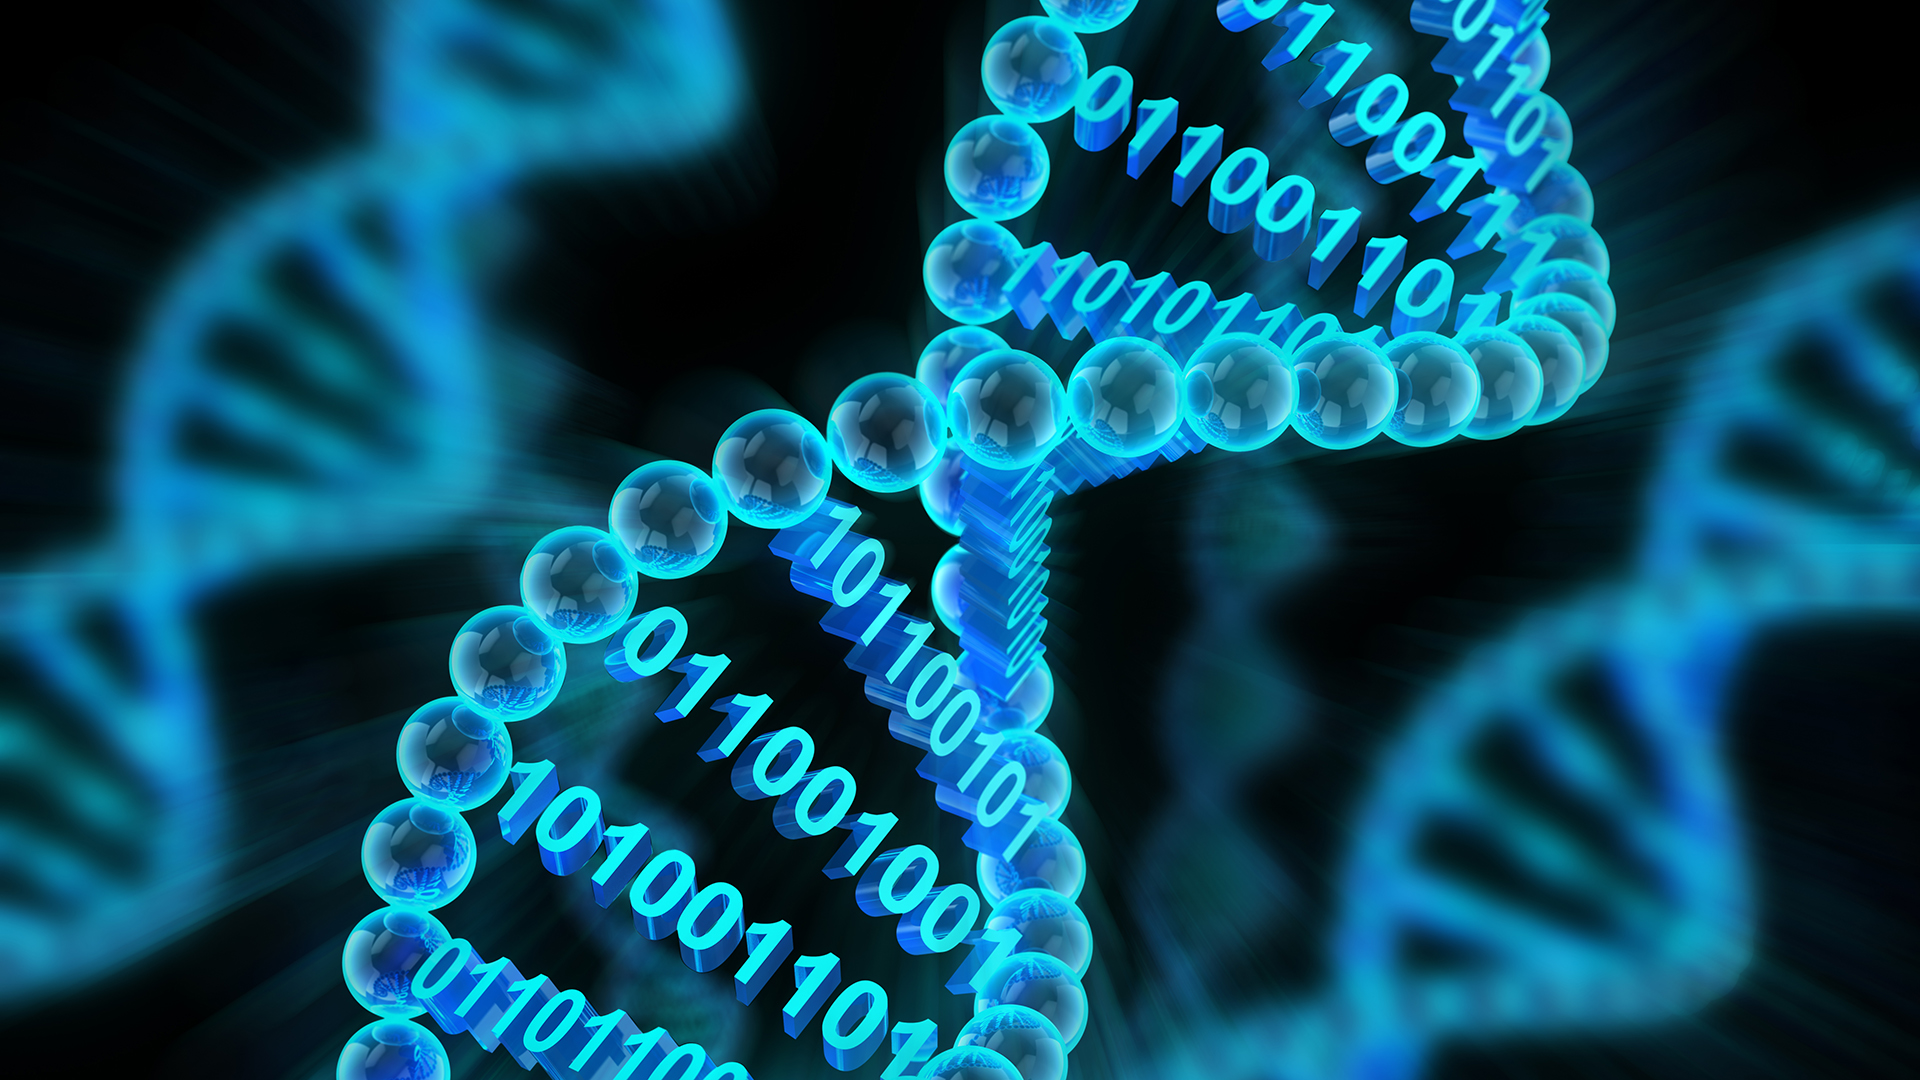 a graphic depicting DNA strands made of digital binary code